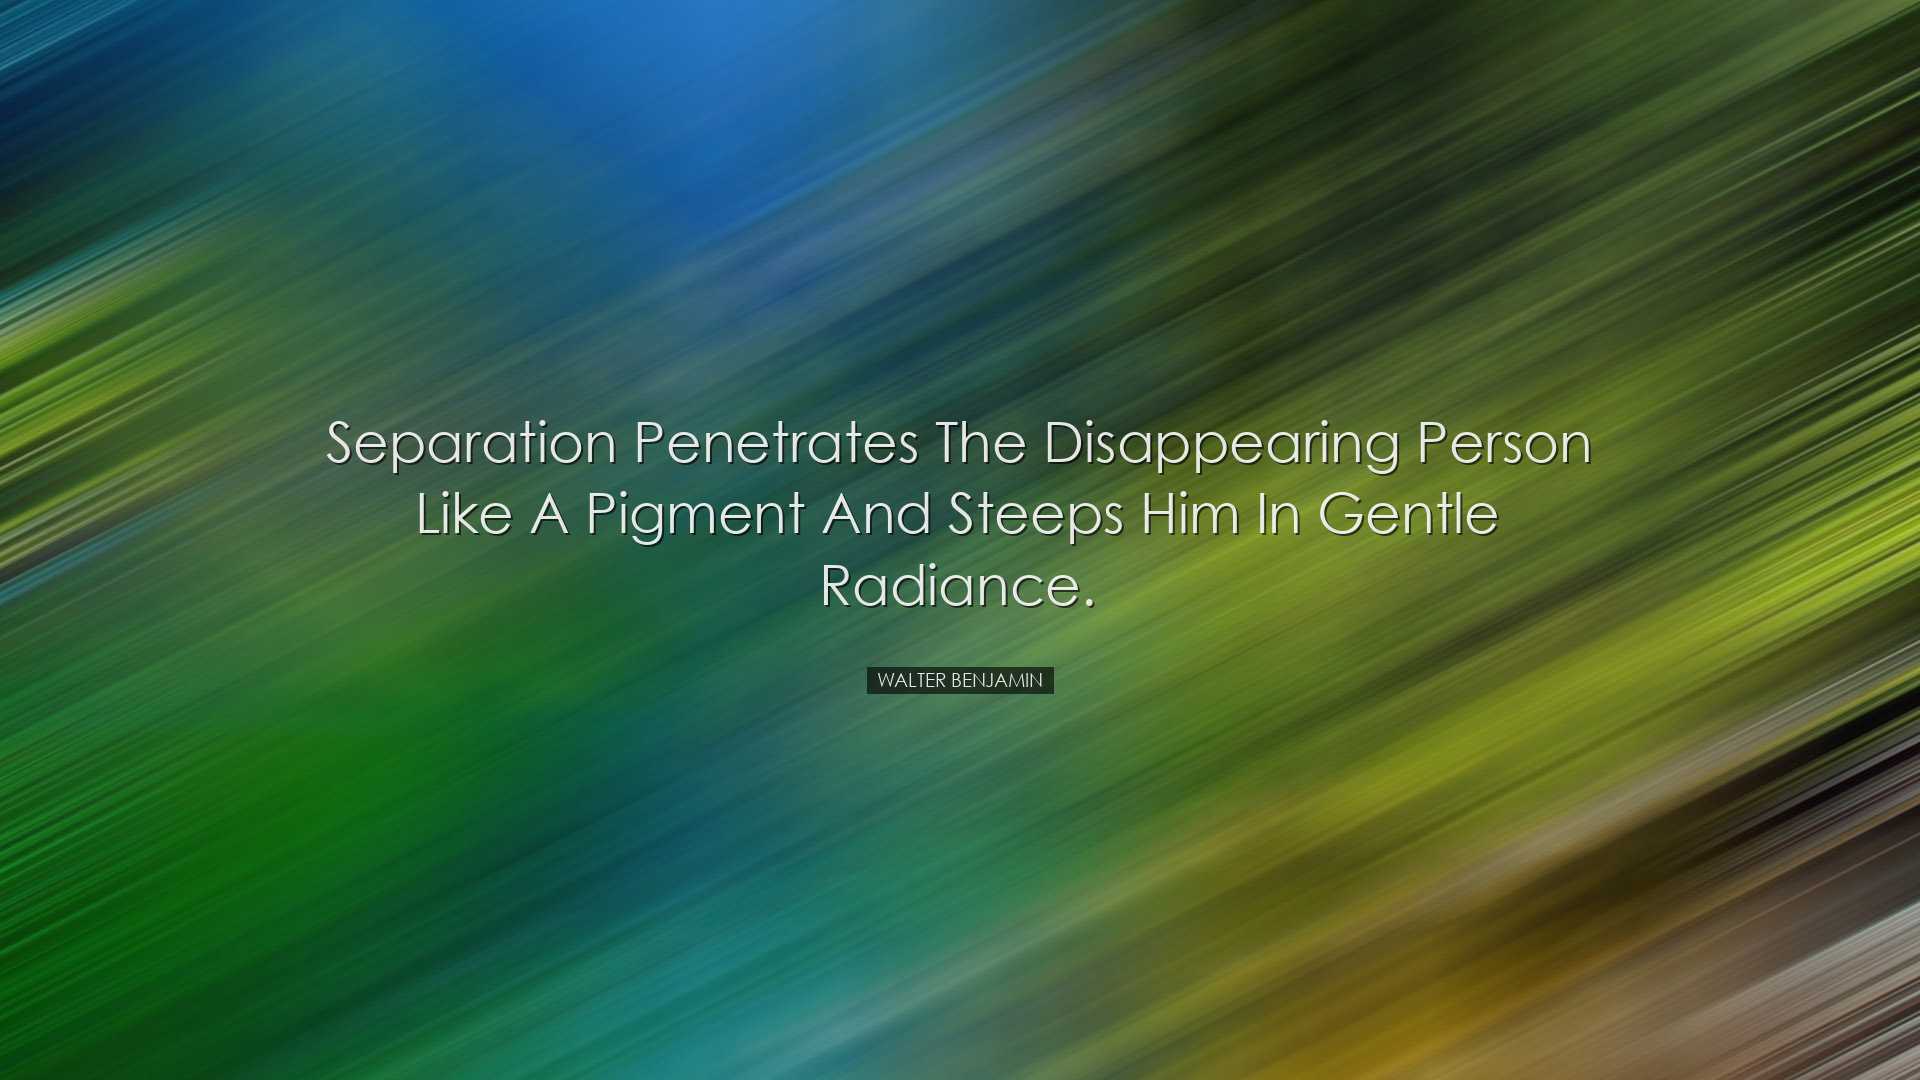 Separation penetrates the disappearing person like a pigment and s